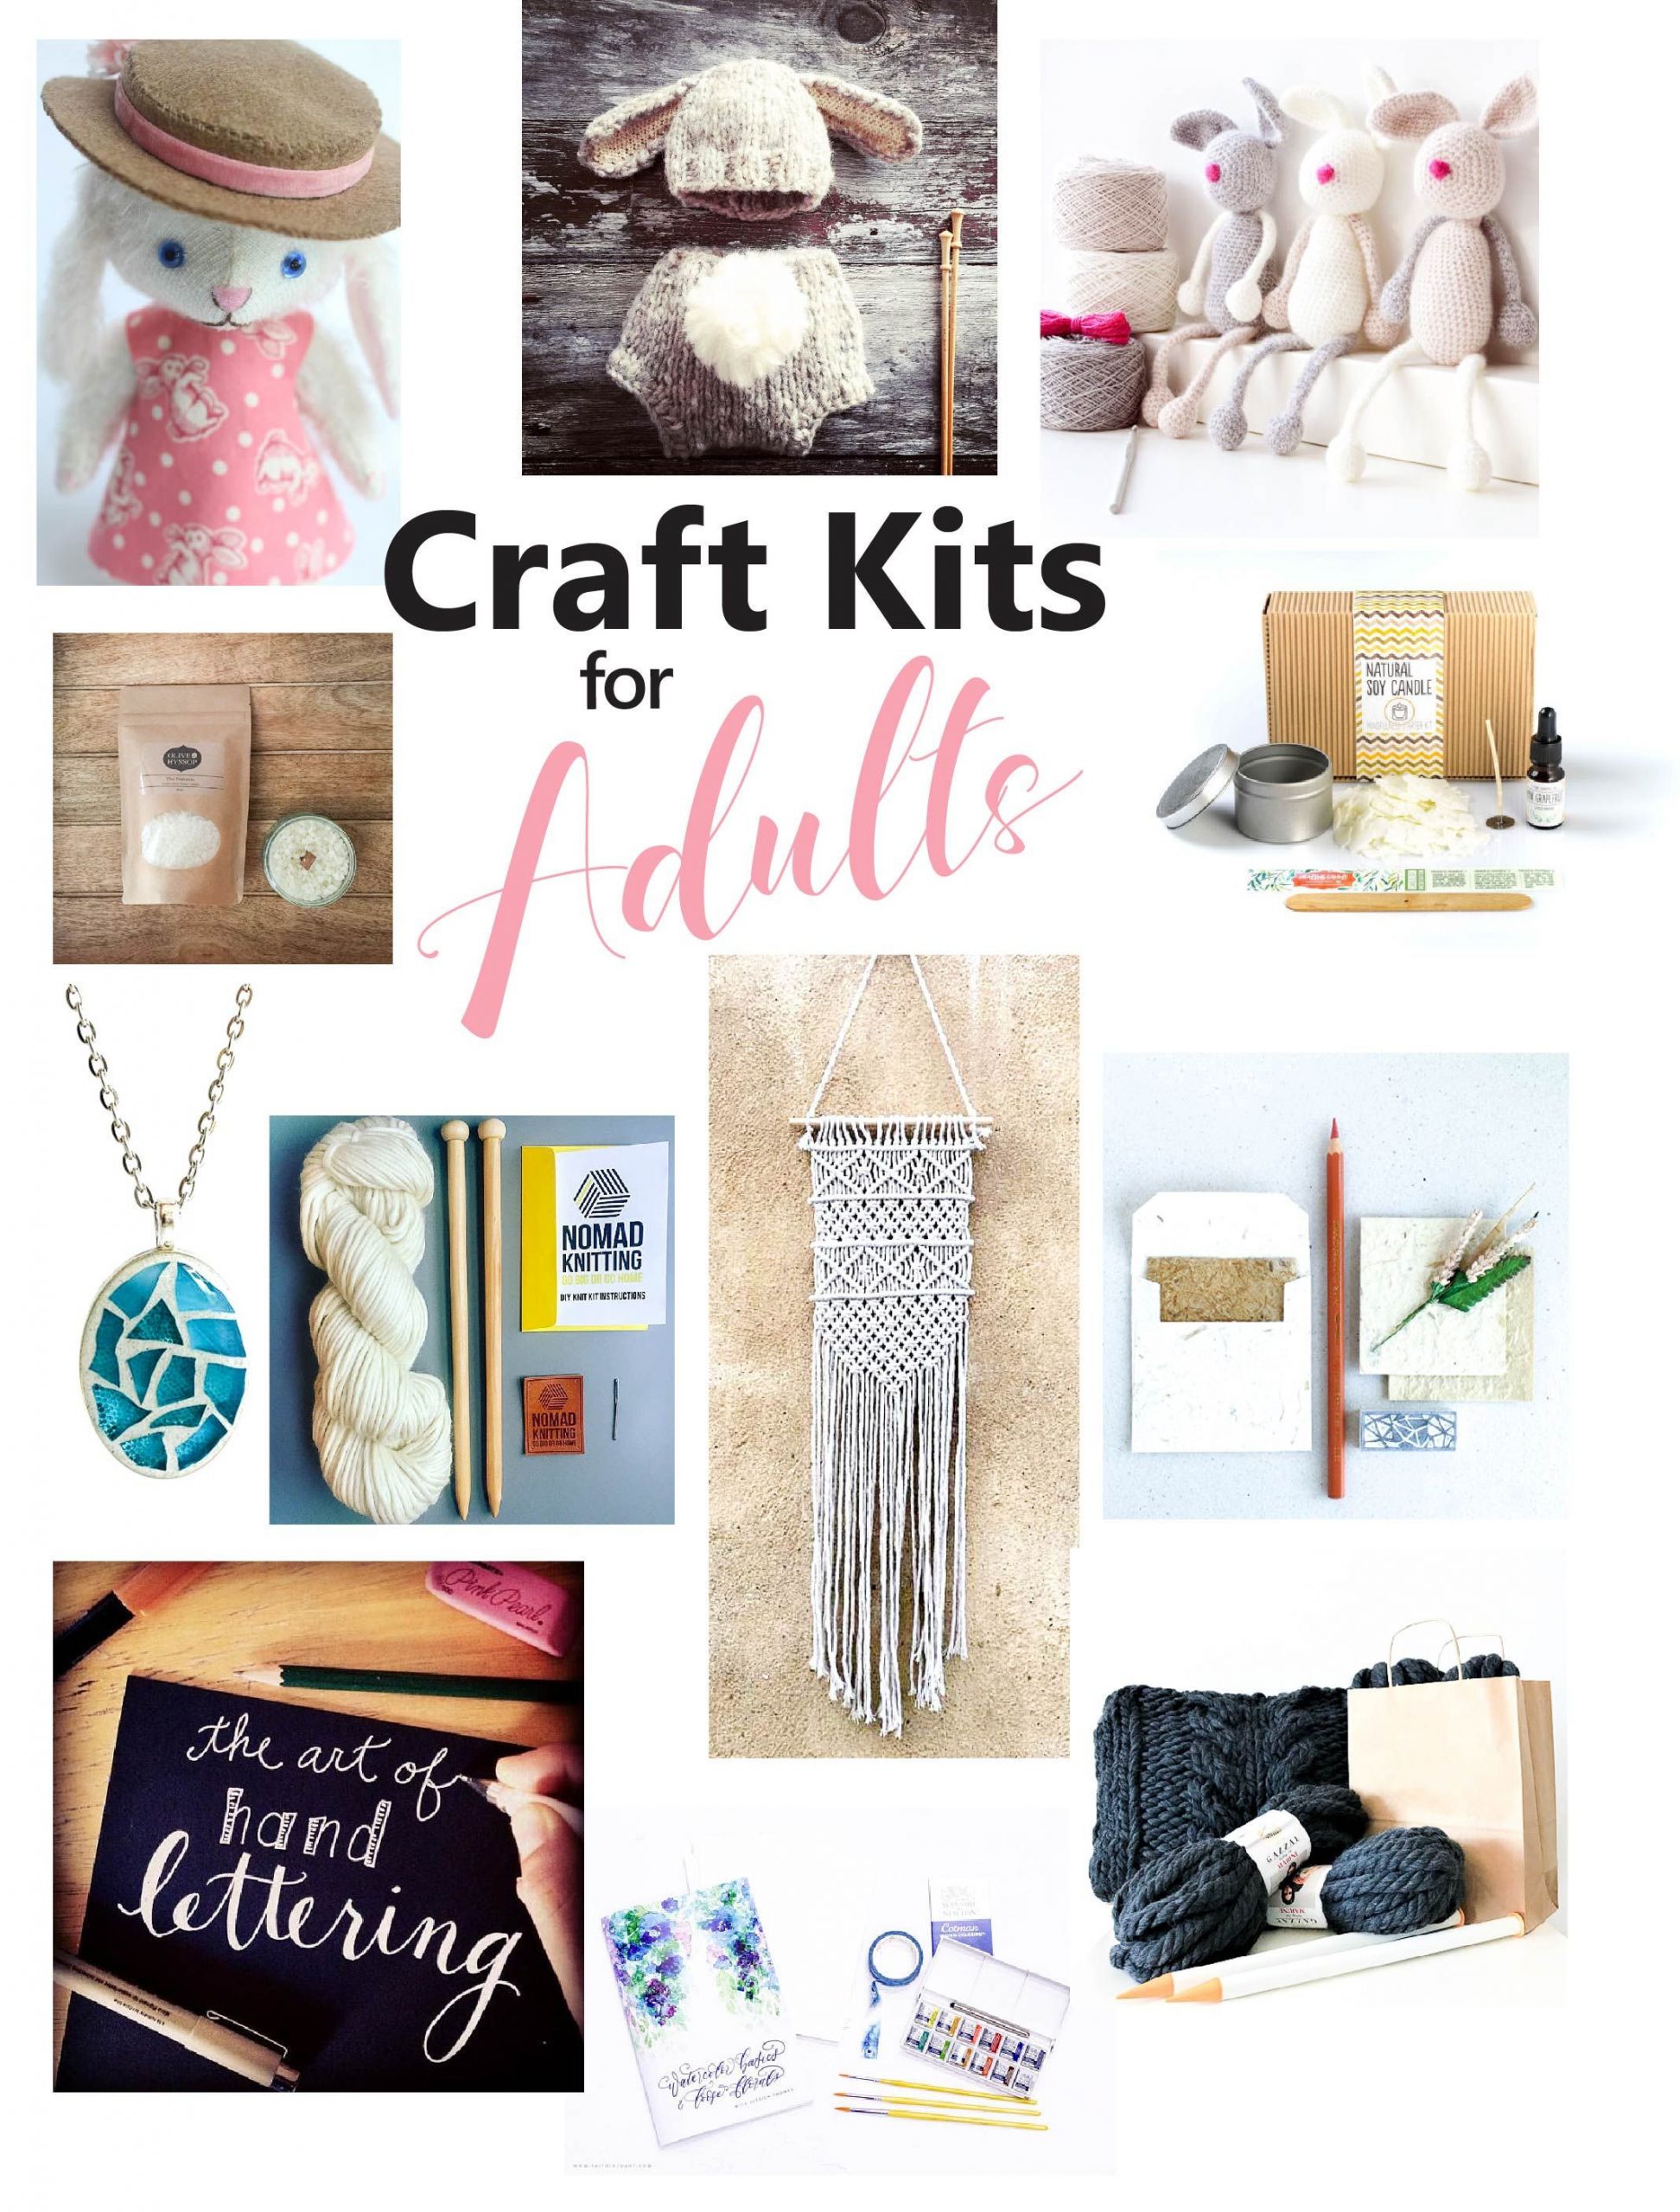 DIY Kits For Adults
 The Best Craft Kits for Adults With images